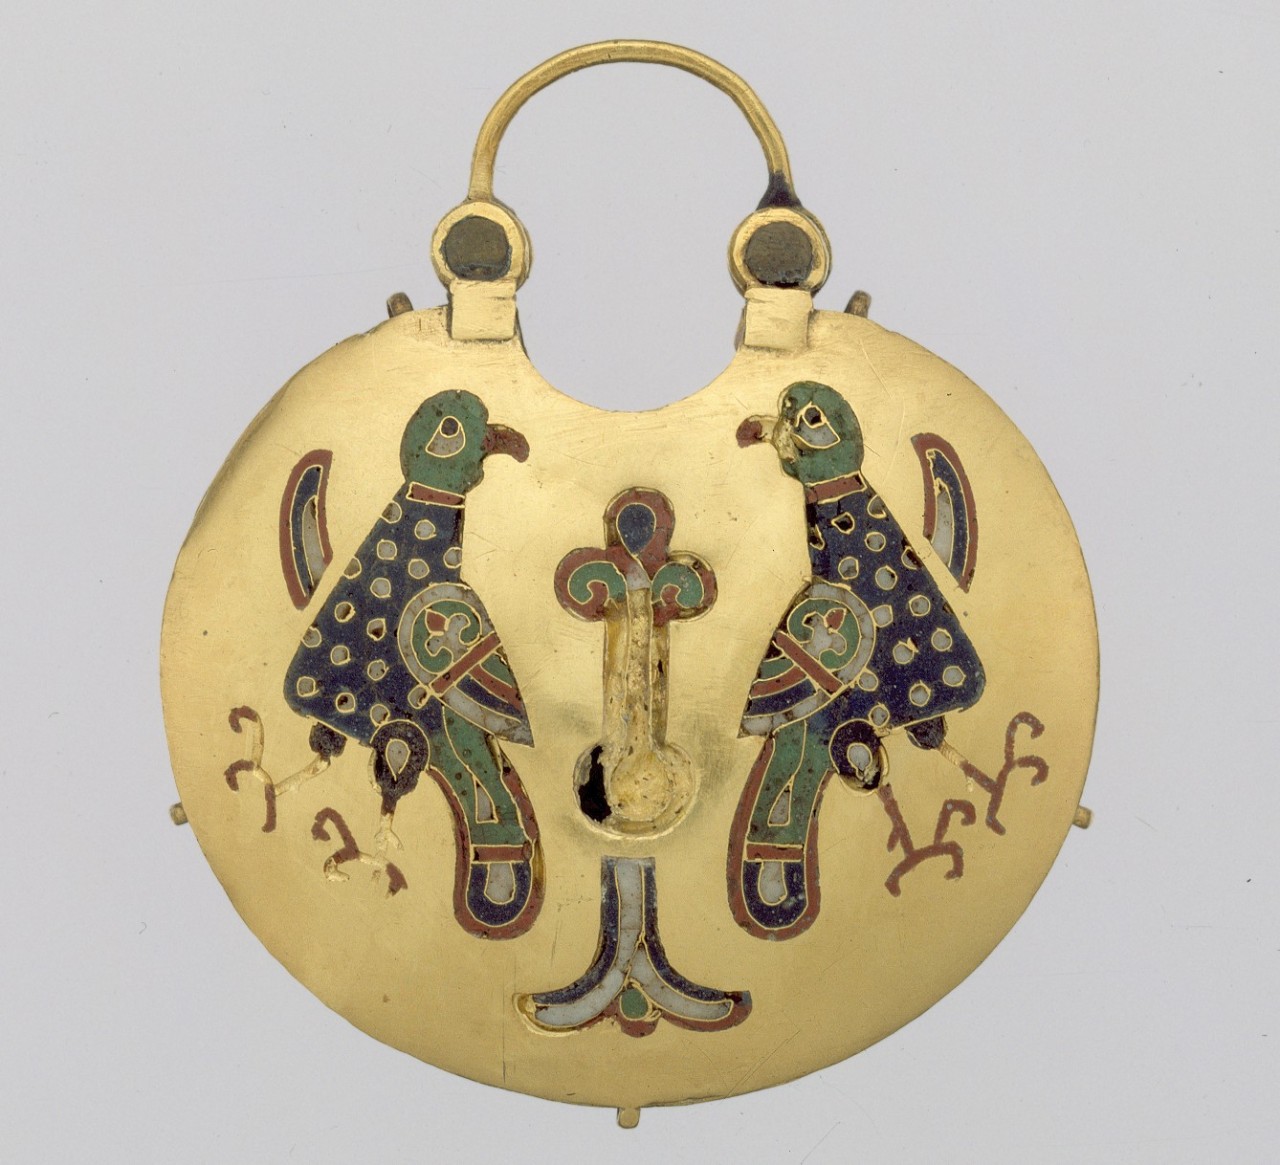 Gold pendant, circa 1000 - 1200. From Kievan Rus', a realm of the Slavic peoples of Eastern and Northern Europe. The Metropolitan Museum of Art.jpg